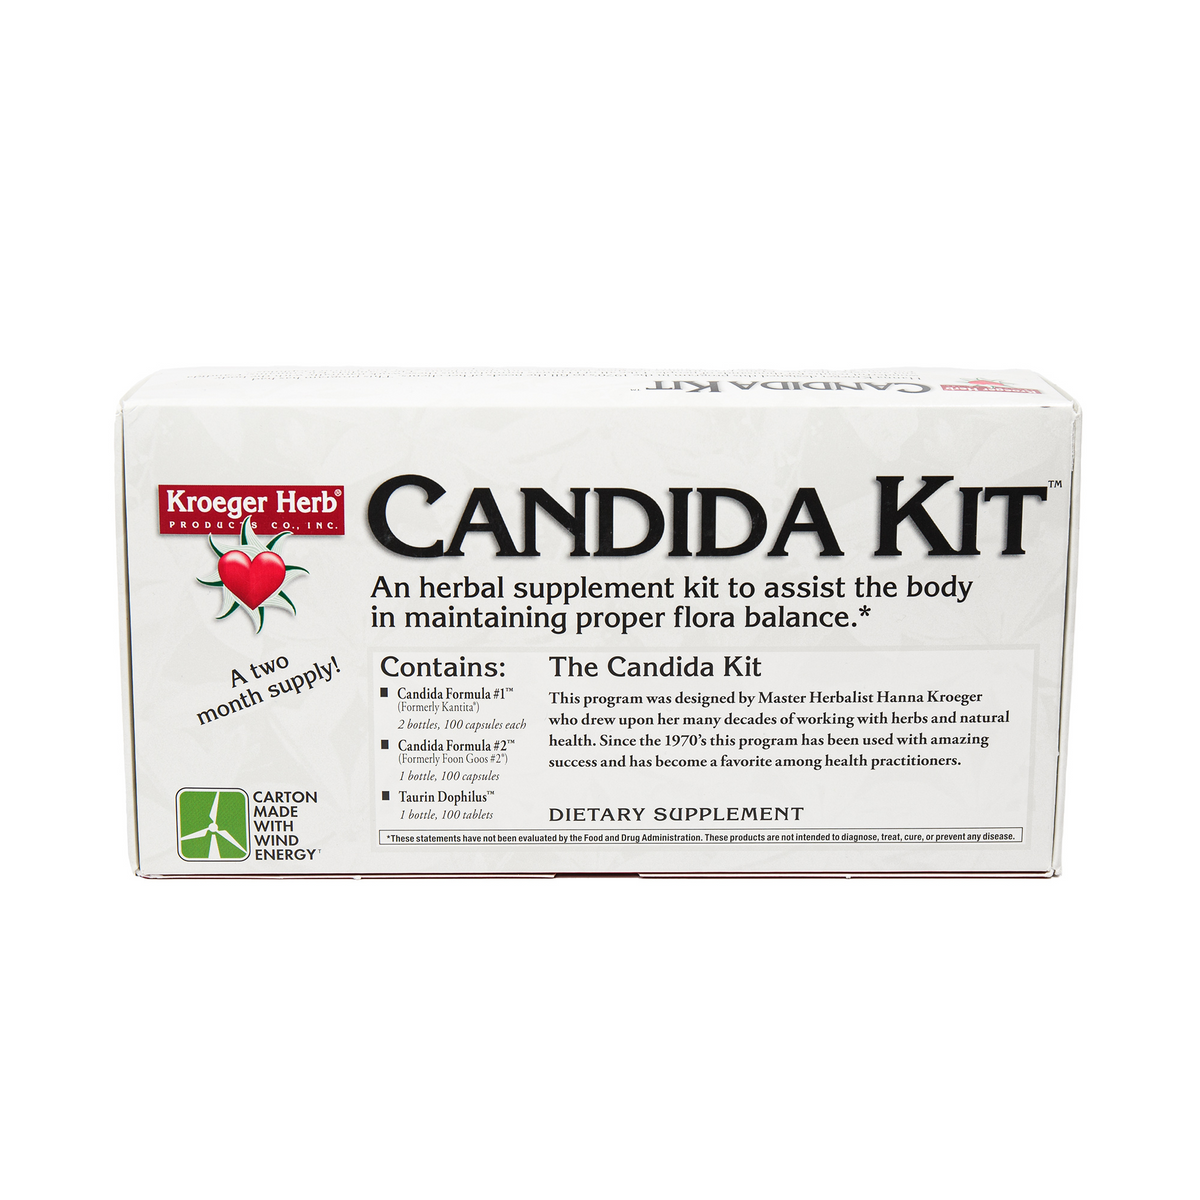 Primary image of Candida Kit